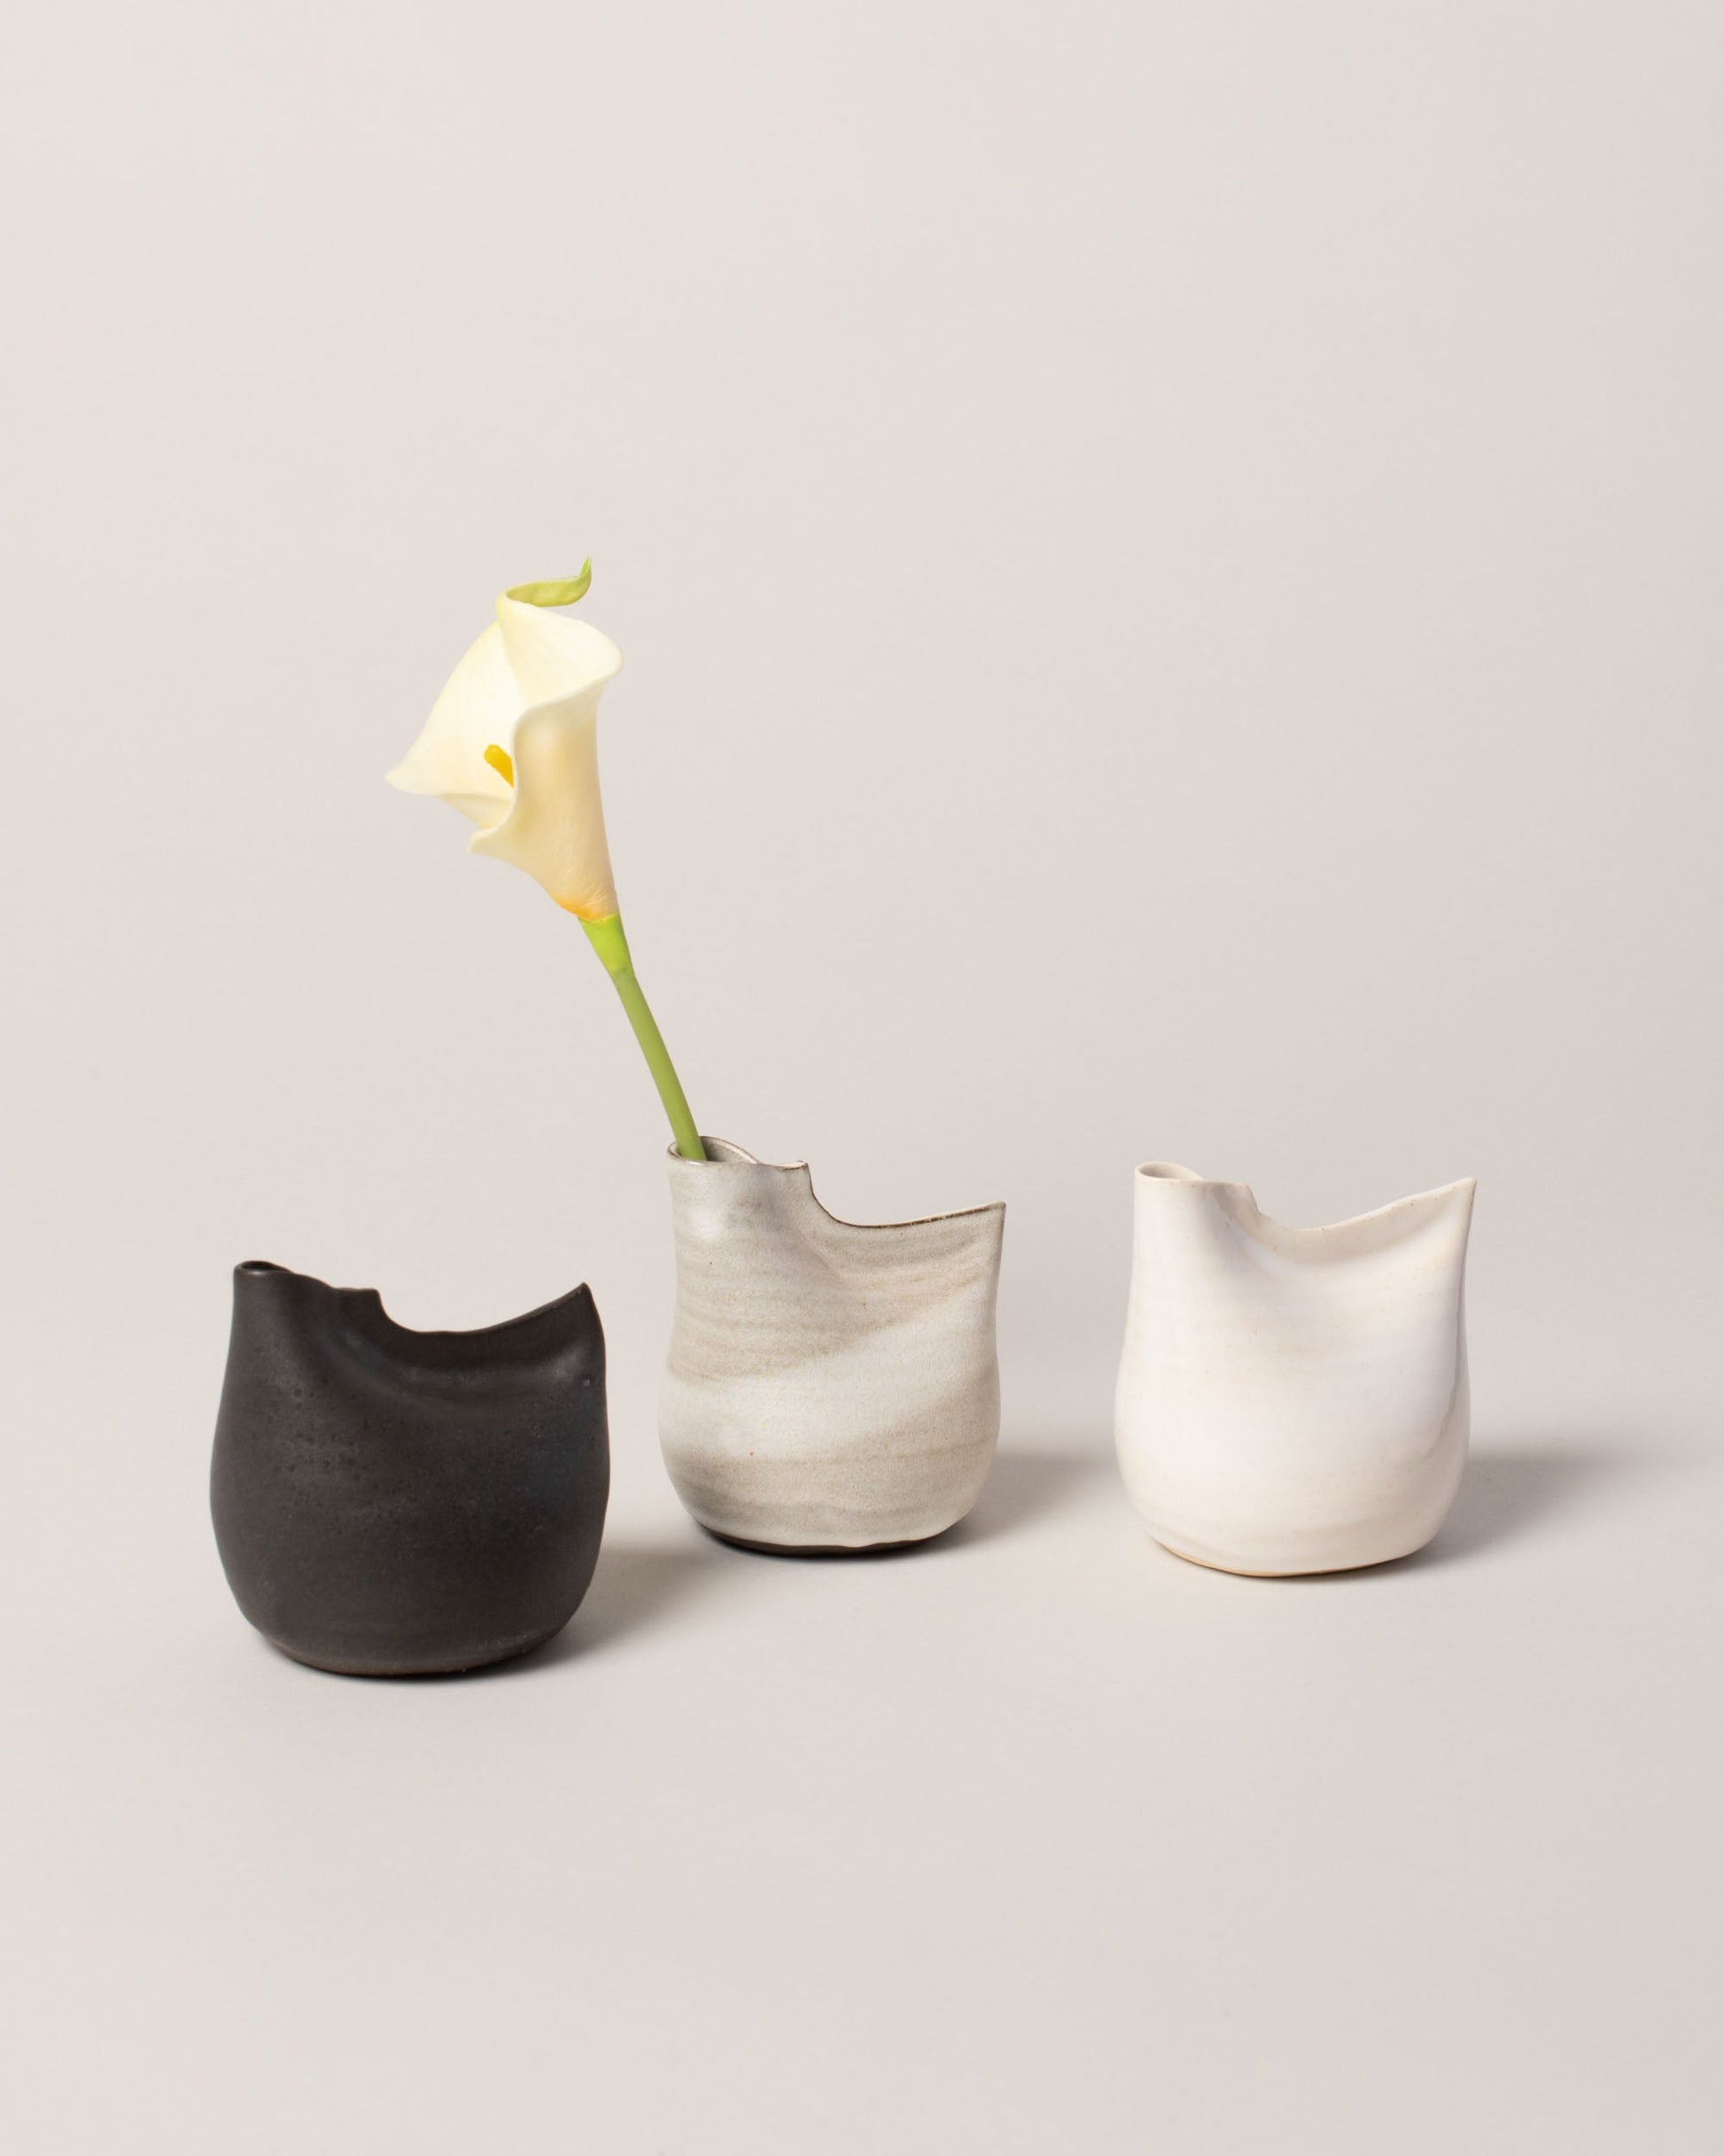 Group of Eric Bonnin Oatmeal, Off-White and Gunmetal Small Bird Vases on light color background.